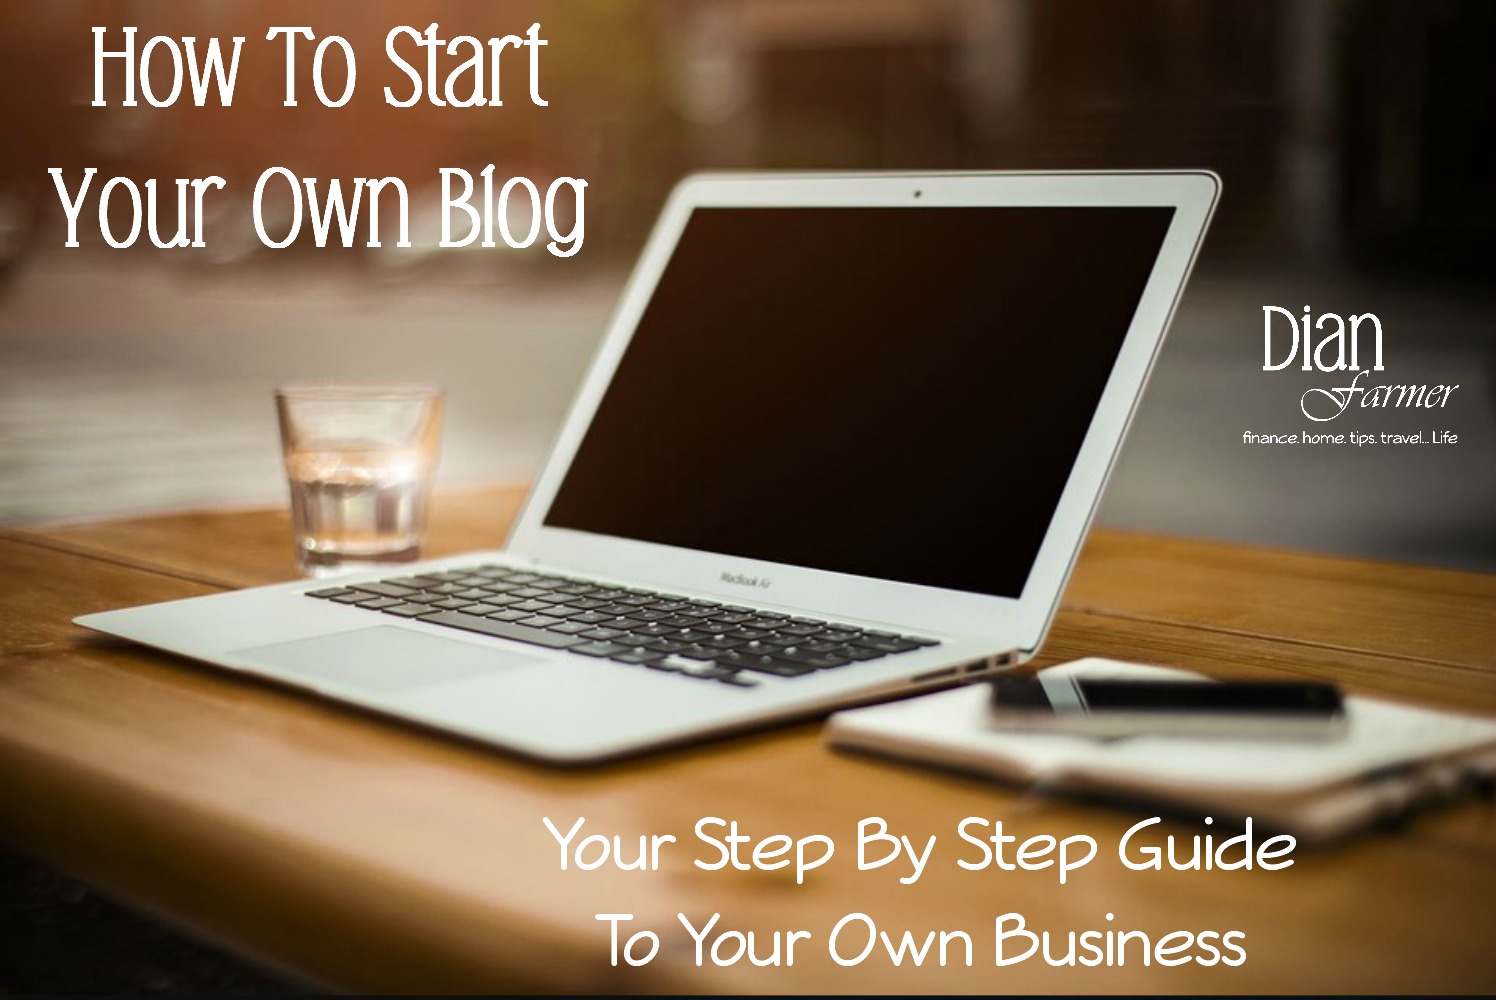 Want to start your own business, change careers, or need extra cash? Why not start your own blog or maybe you need to know how to maintain a blog? This is for you.